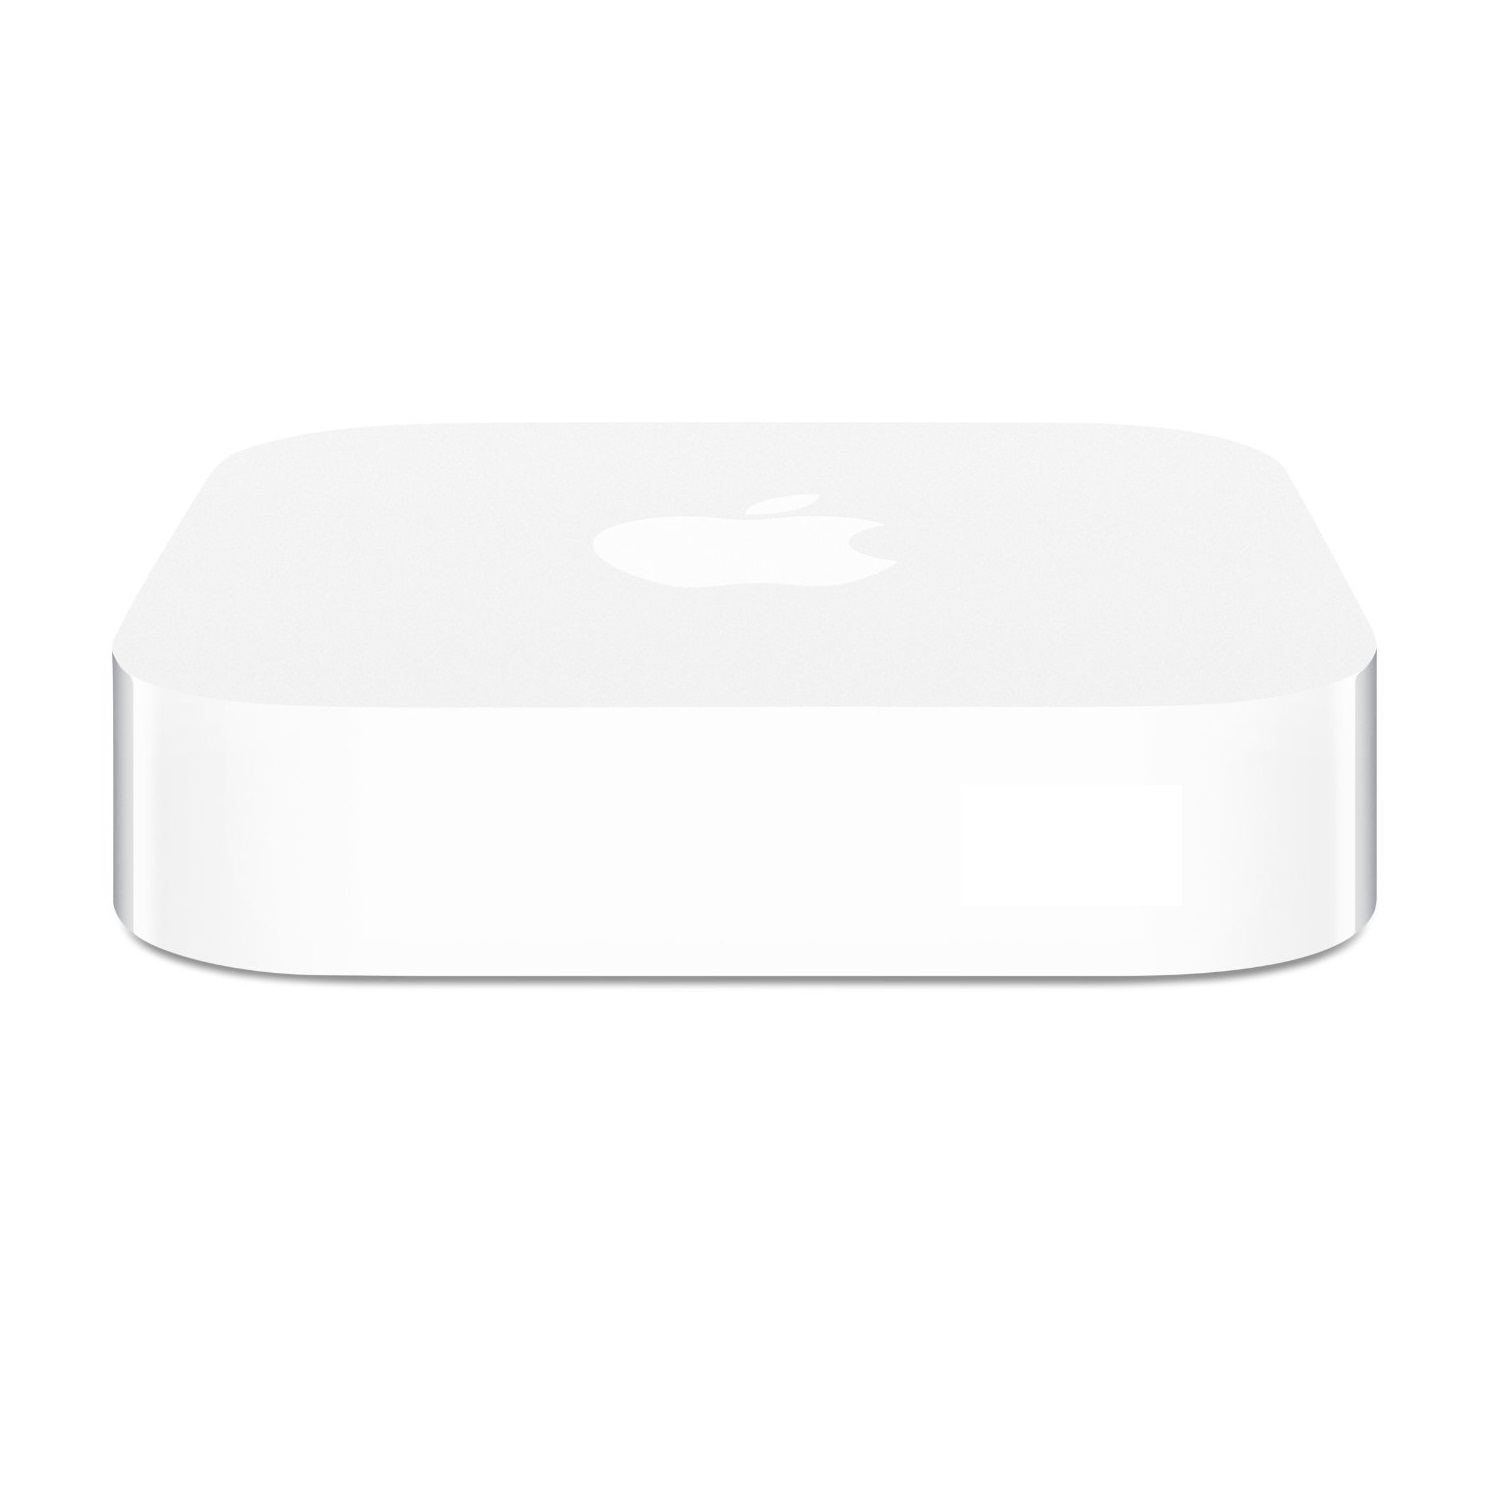 Bộ phát wifi Apple AirPort Express Base Station